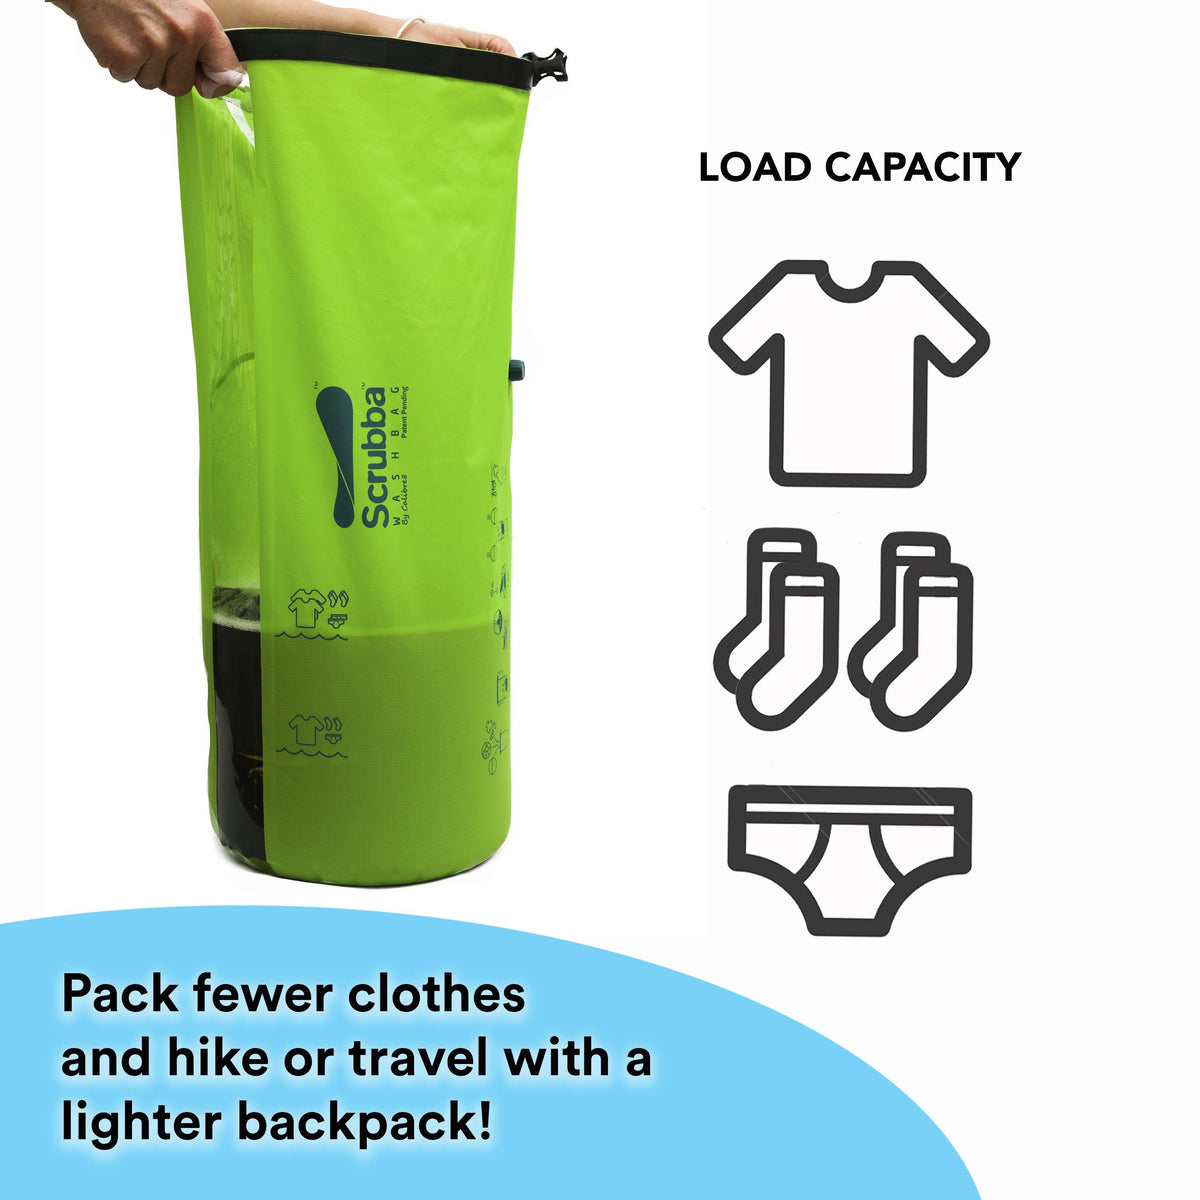 Scrubba Washing Bag & Why Every Traveller Needs One - Simply Plastic Free